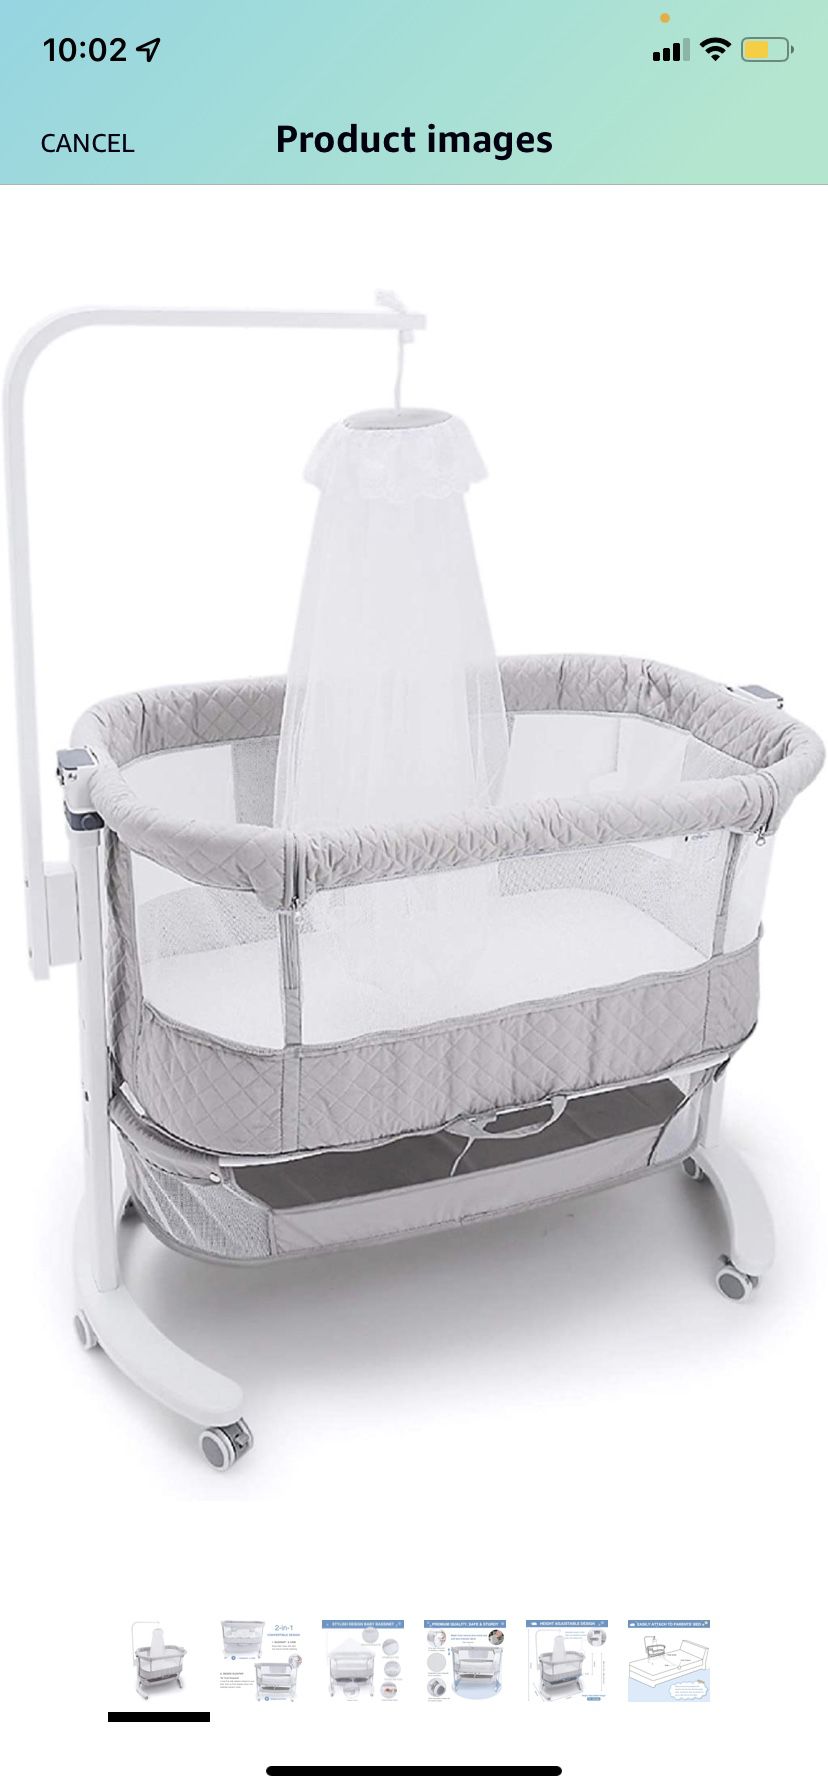 beiens 2-in-1 Baby Bassinet, Wooden Bedside Sleeper Baby Bed Cribs with Removable Mosquito Net, Adjustable Baby Nursery Bed for Infant, Newborn, Baby 